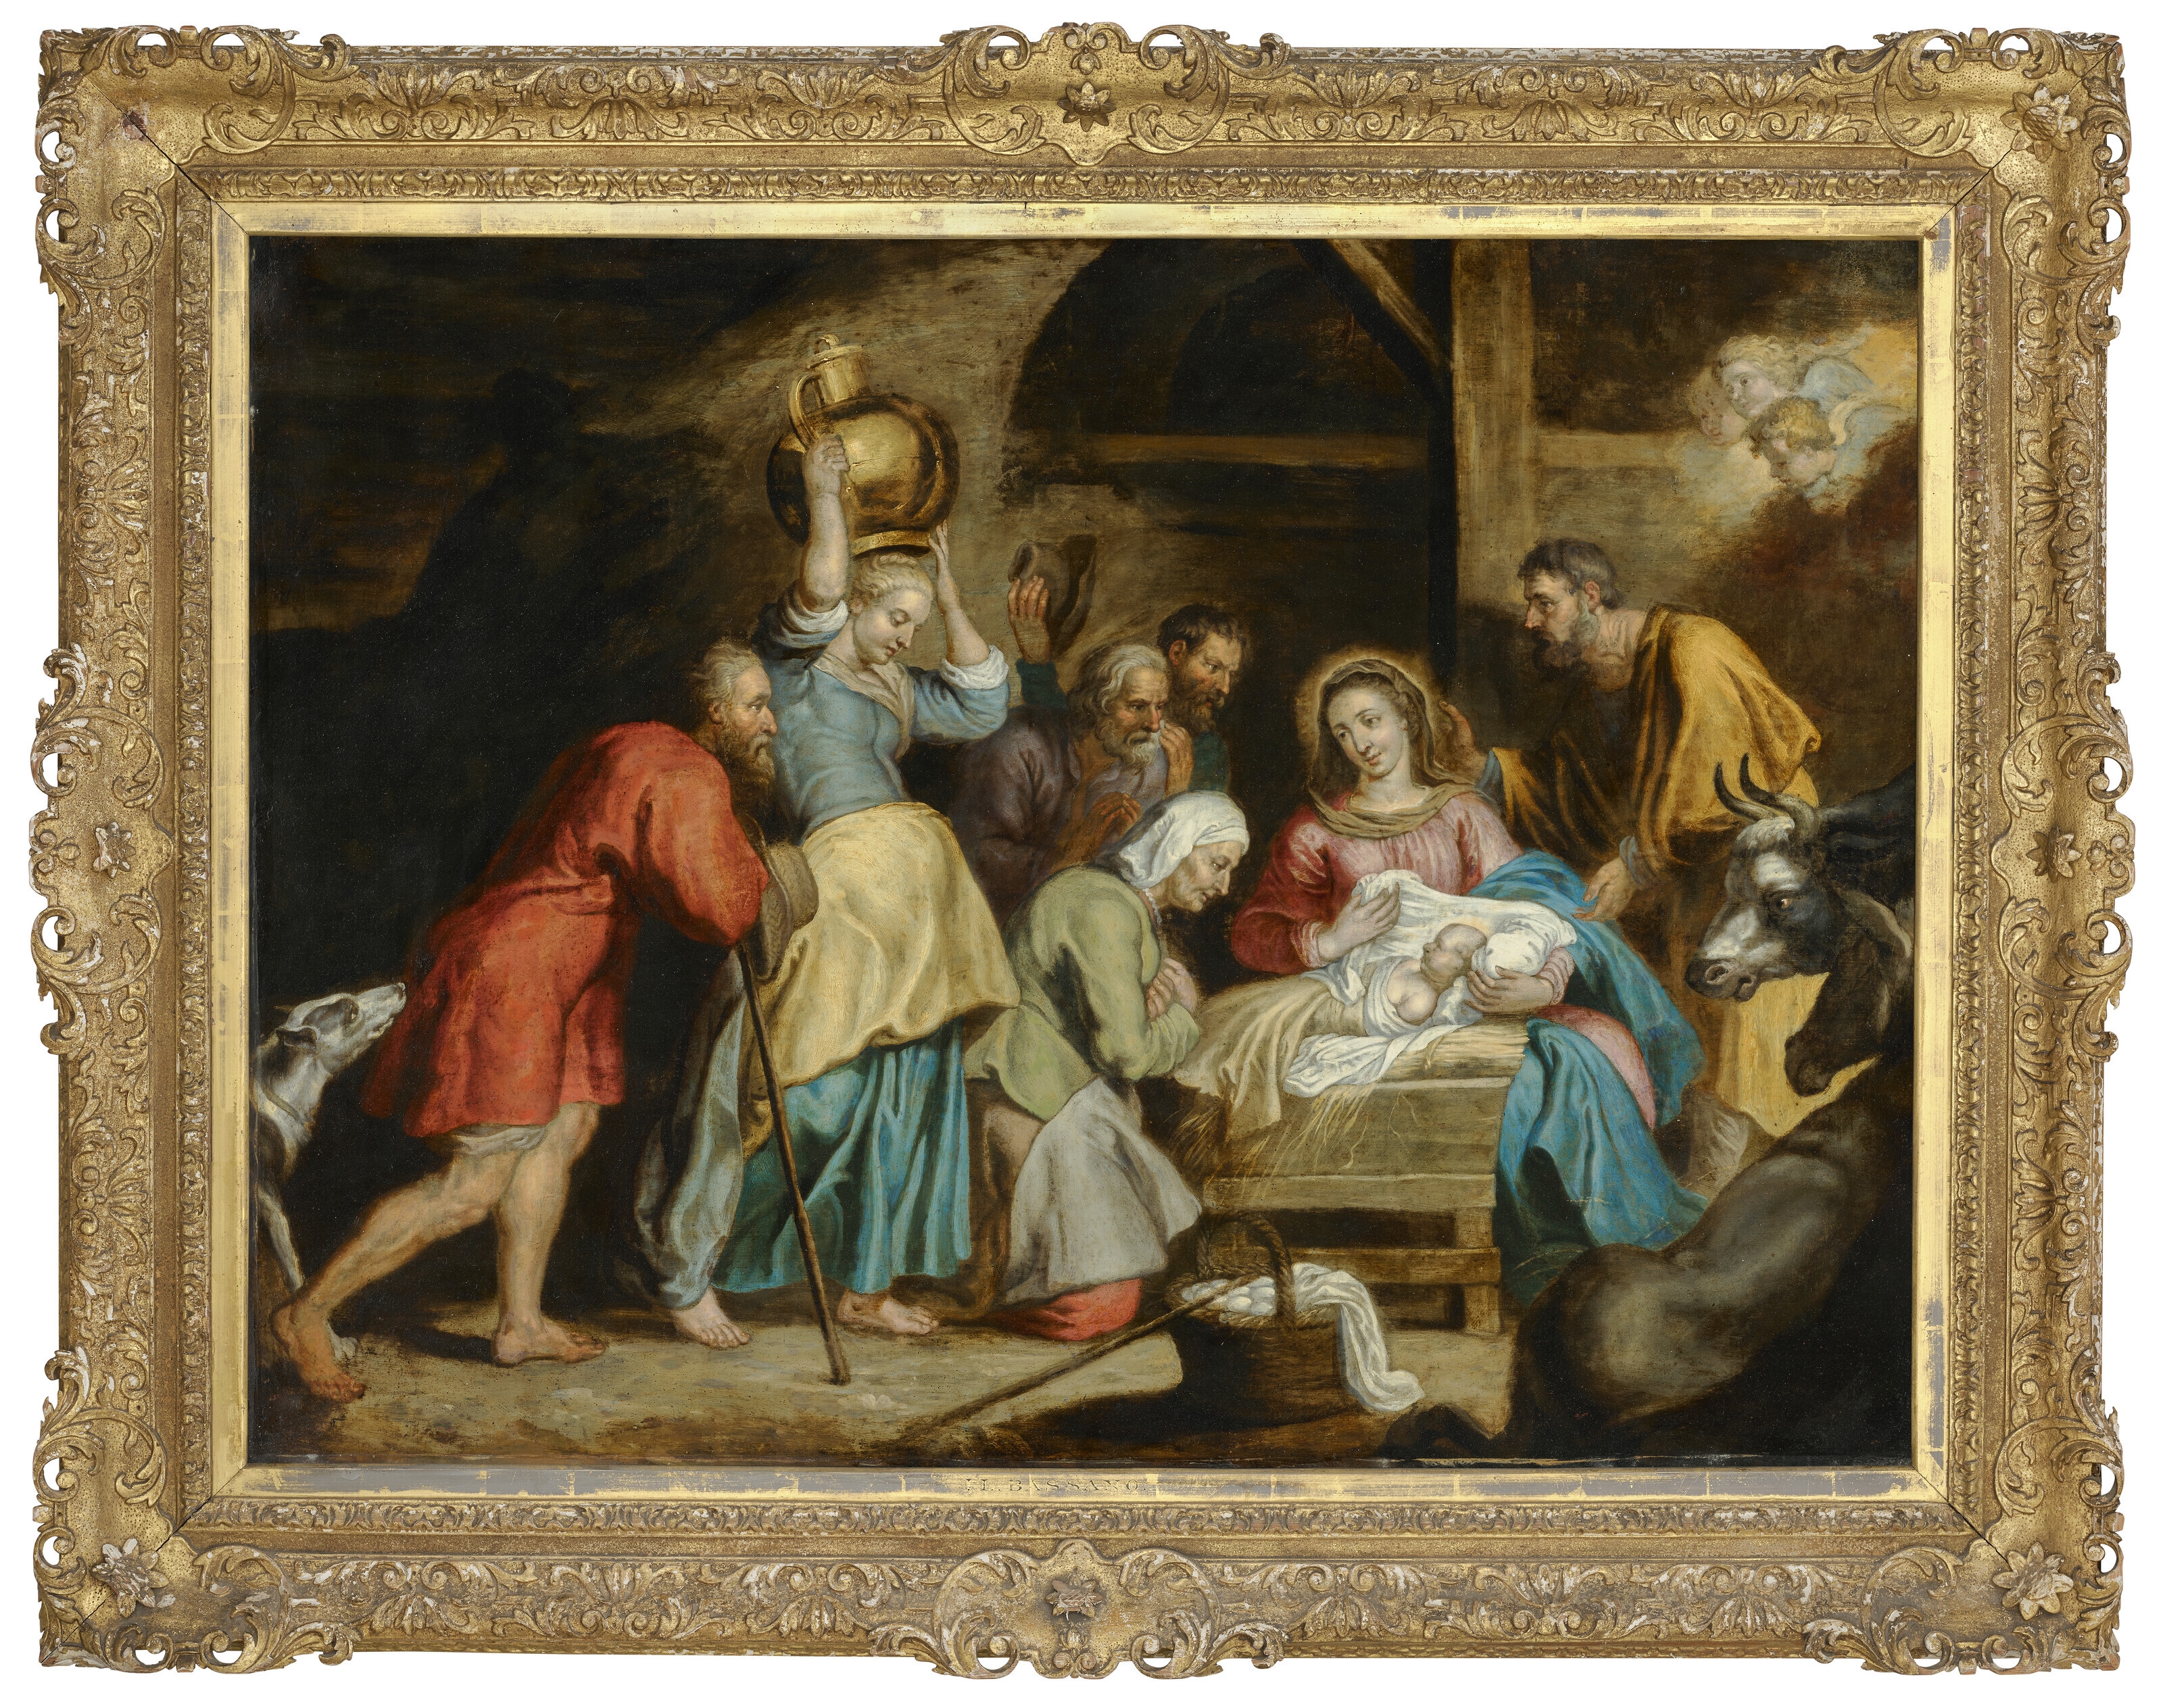 The Adoration of the Shepherds by Peter Paul Rubens